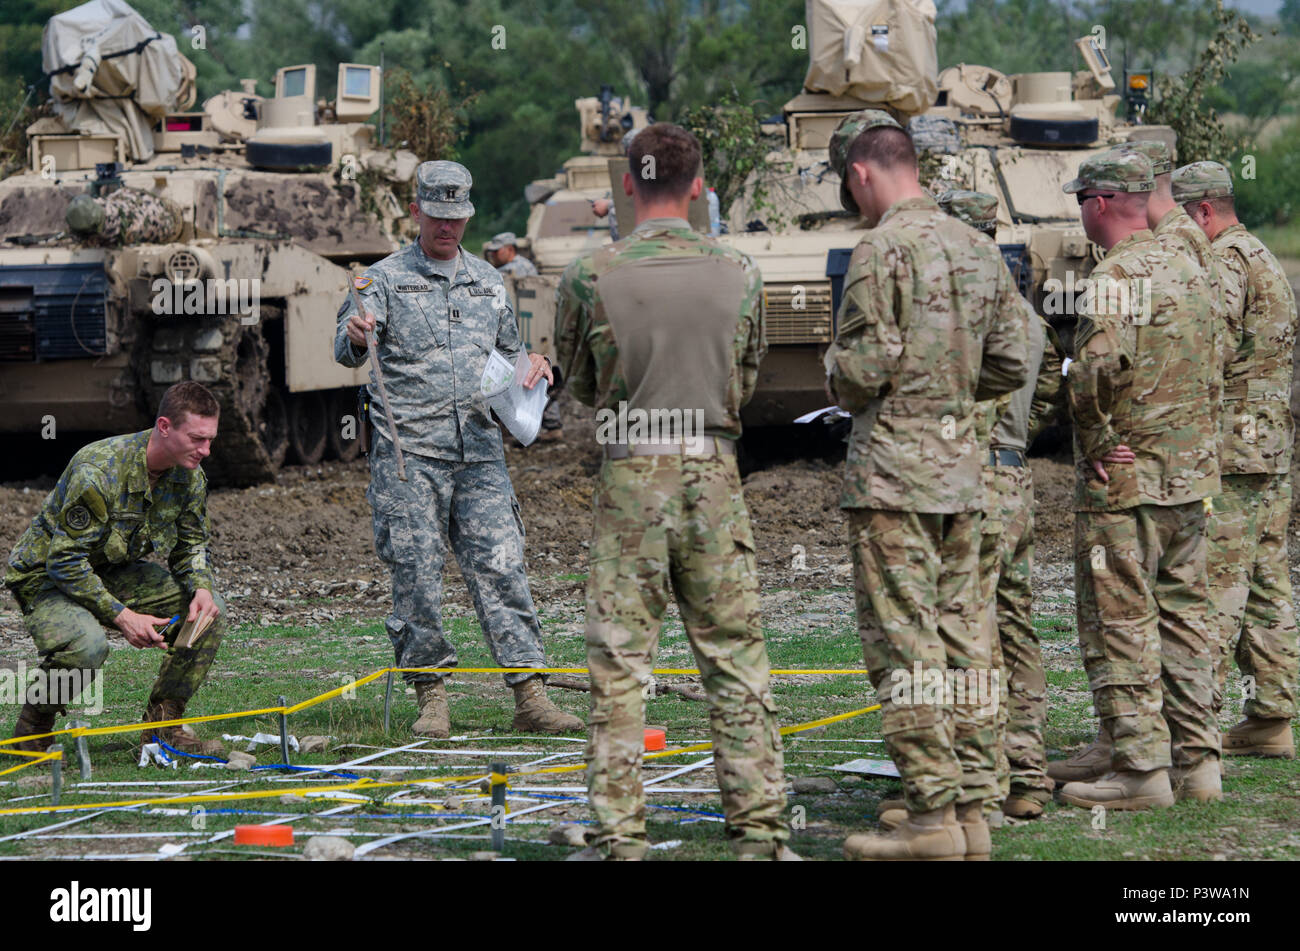 us-army-capt-allan-whitehead-commander-of-company-c-2nd-battalion-116th-cavalry-brigade-combat-team-briefs-the-plan-for-his-teams-training-exercise-during-saber-guardian-2016-at-the-romanian-land-forces-combat-training-center-in-cincu-romania-july-30-saber-guardian-2016-is-a-multinational-military-exercise-involving-approximately-2800-military-personnel-from-ten-nations-including-armenia-azerbaijan-bulgaria-canada-georgia-moldova-poland-romania-ukraine-and-the-us-the-objectives-of-this-exercise-are-to-build-multinational-regional-and-joint-partnership-capacity-by-enhancin-P3WA1N.jpg